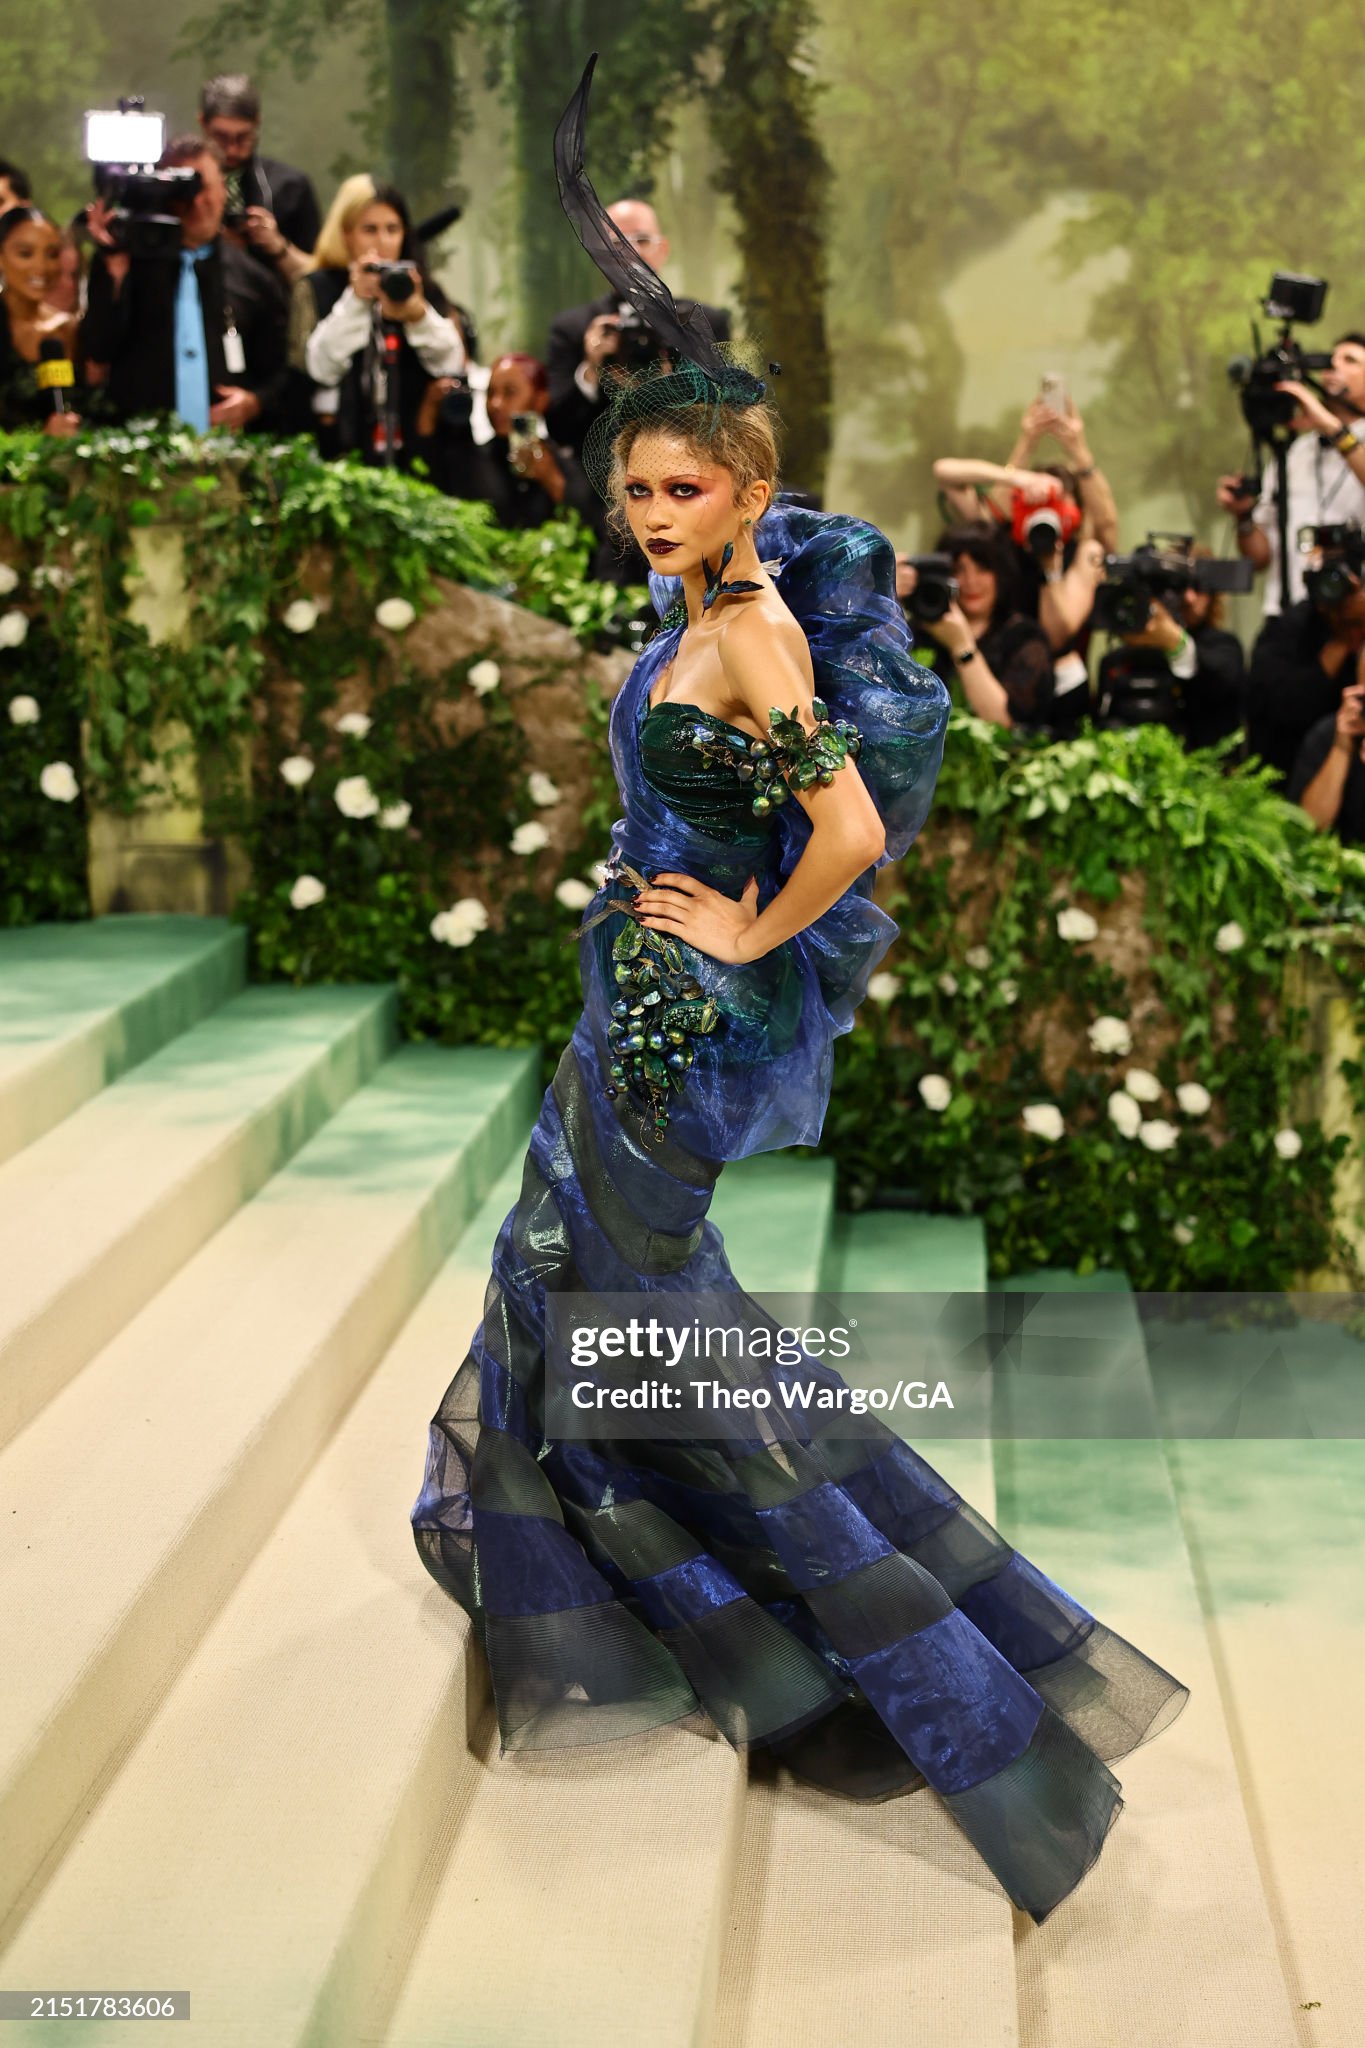 gettyimages-2151783606-2048x2048.jpg